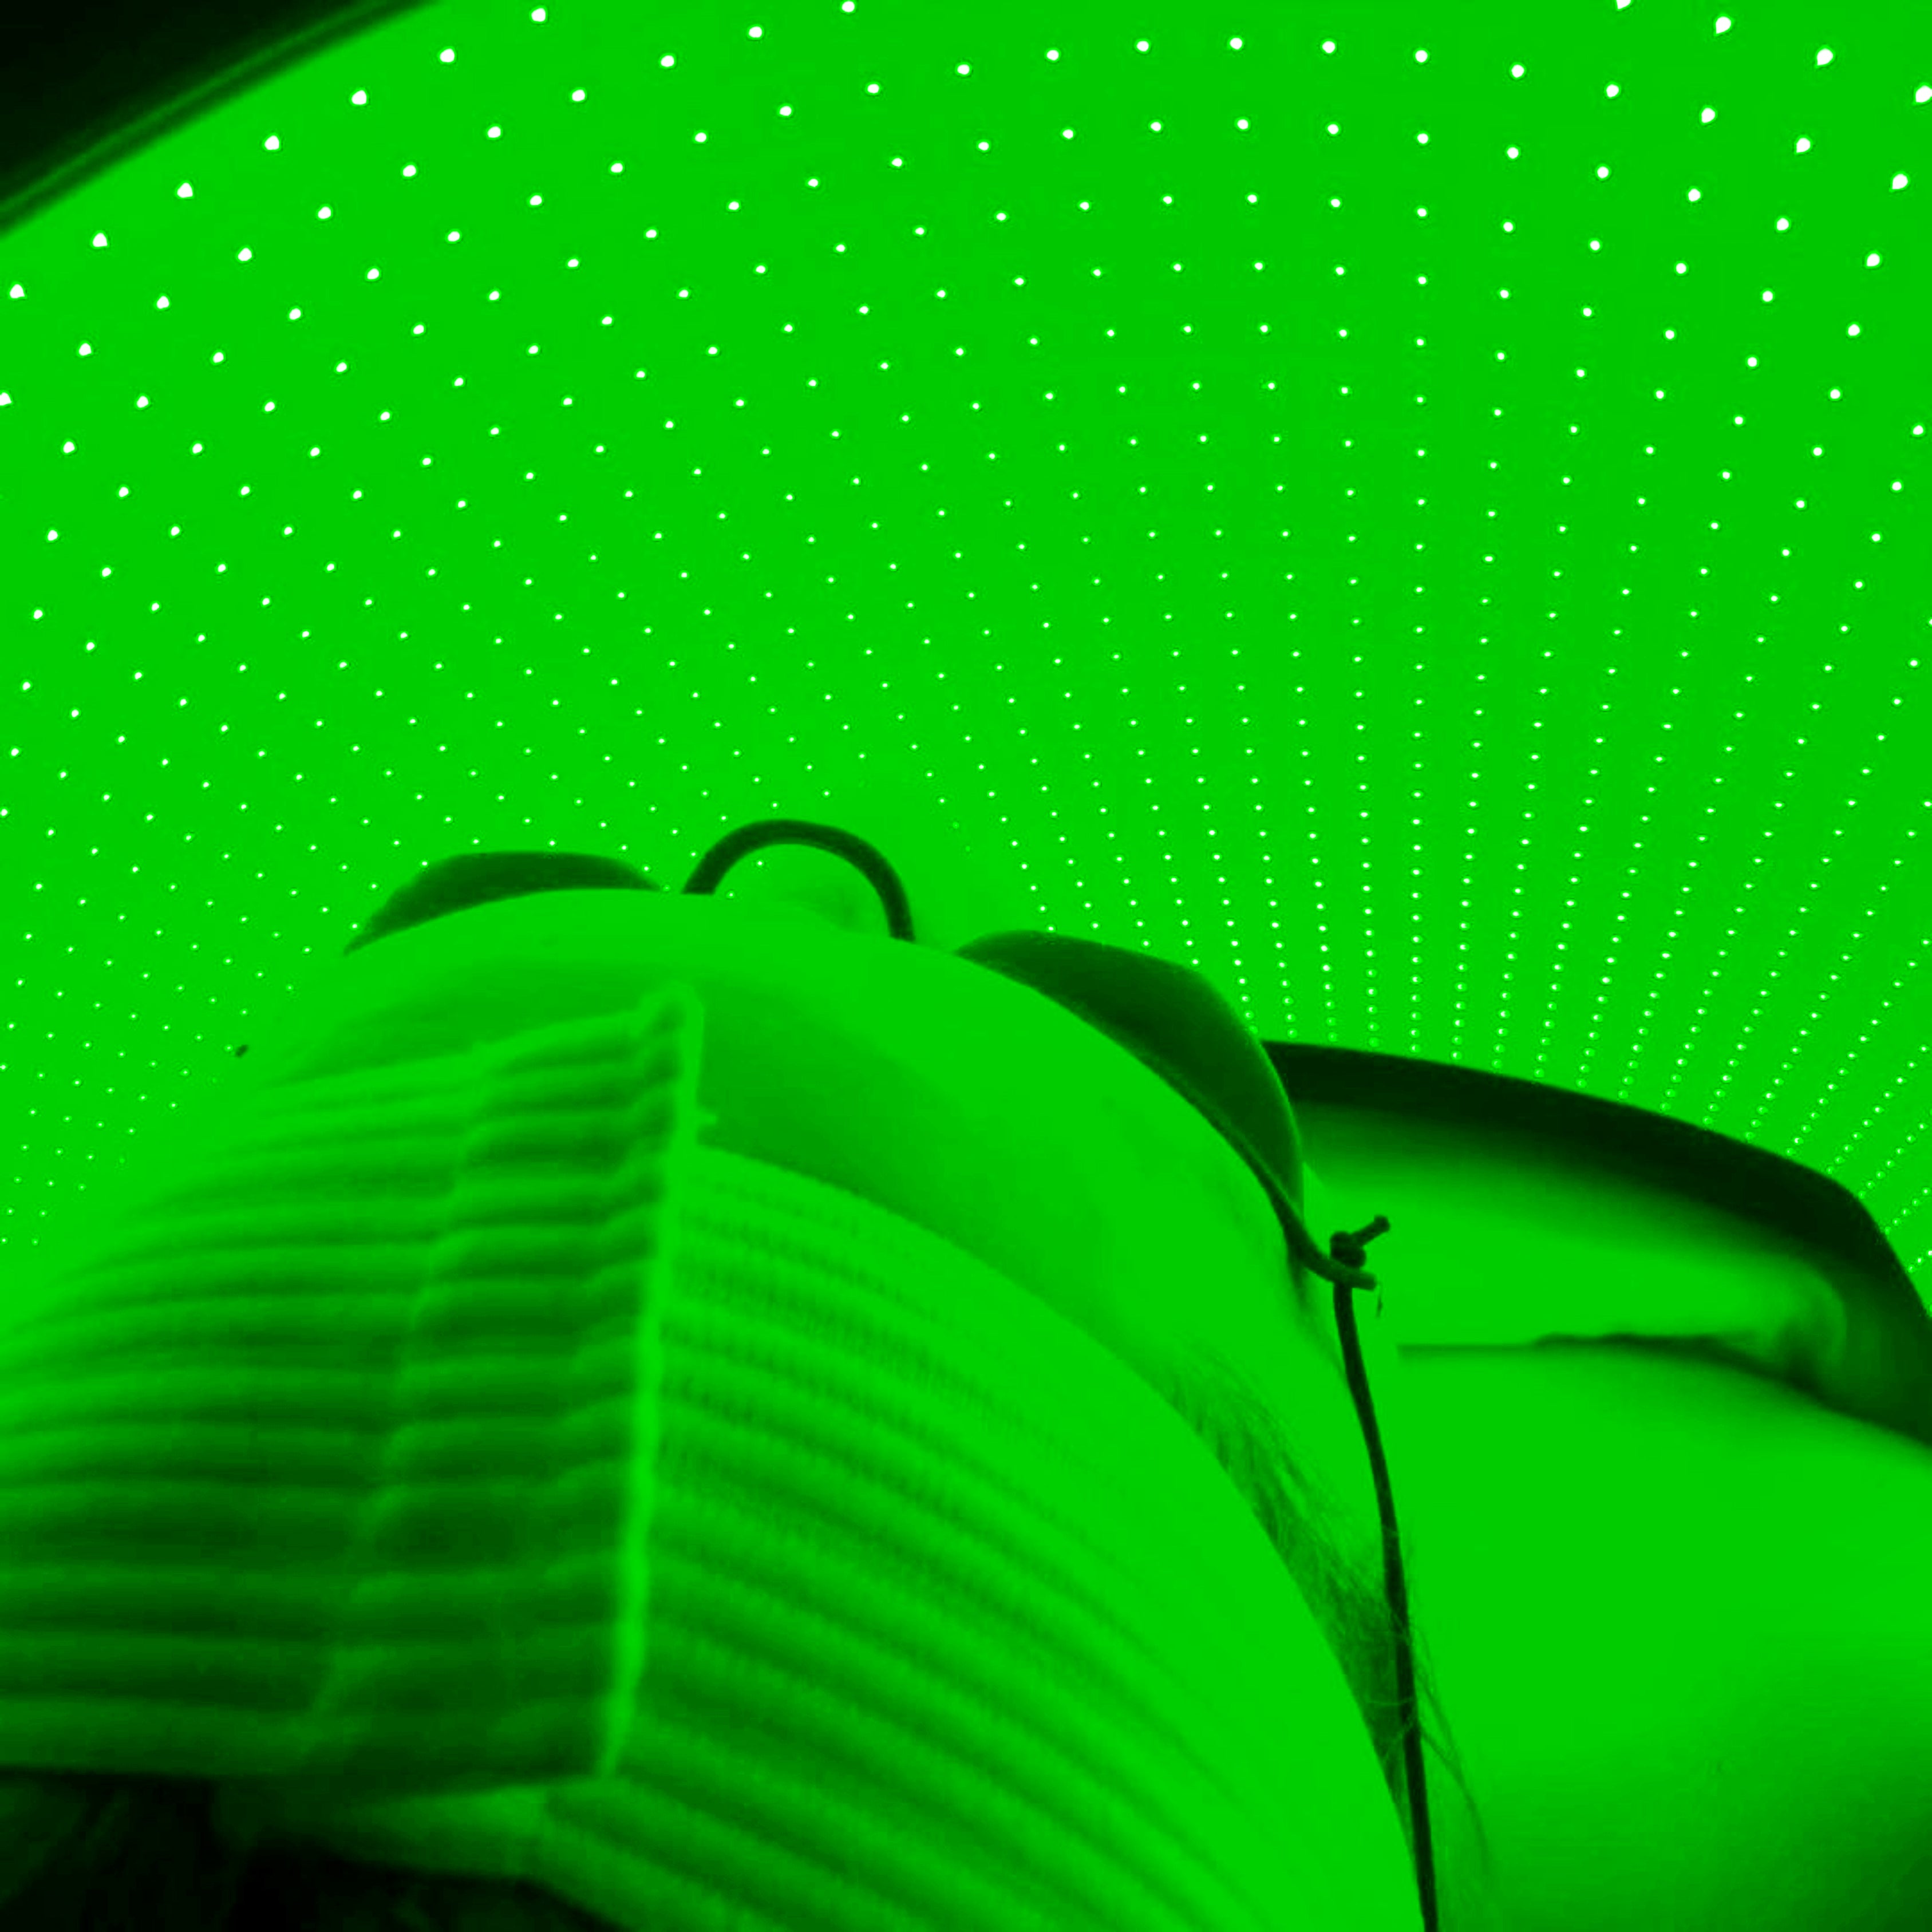 Green Light Therapy